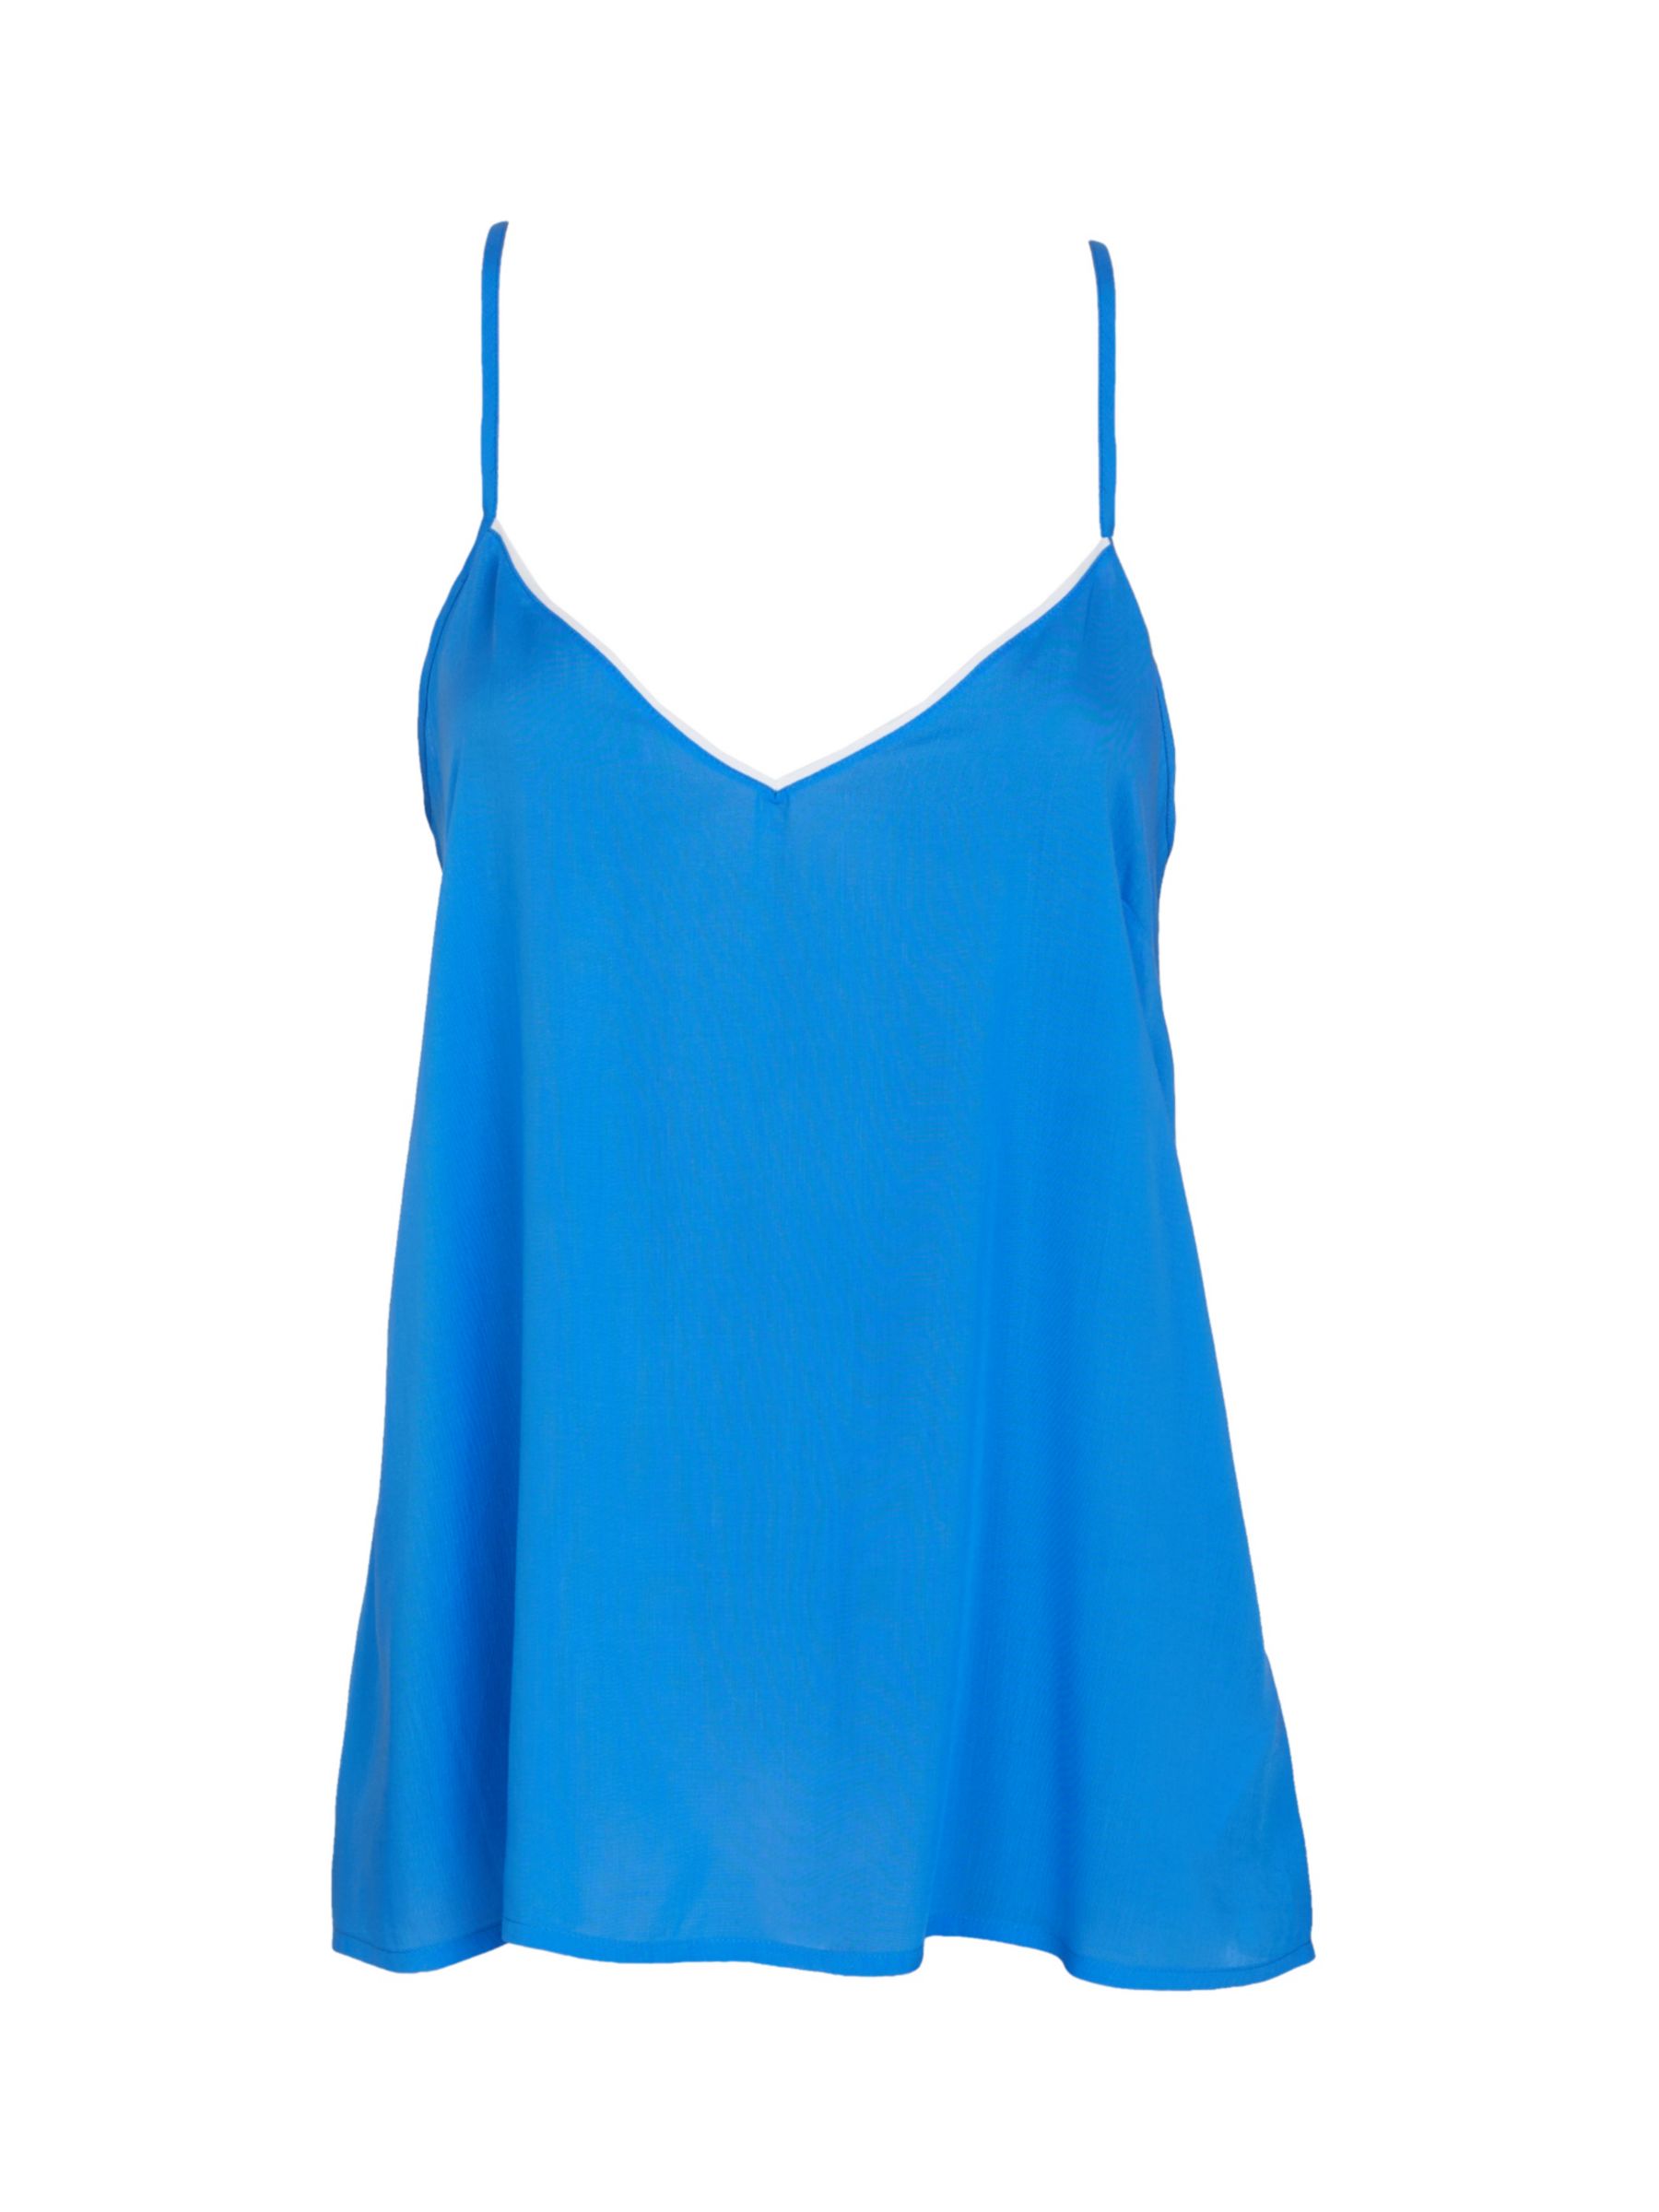 Buy Cyberjammies Donna Modal Cami, Blue Online at johnlewis.com